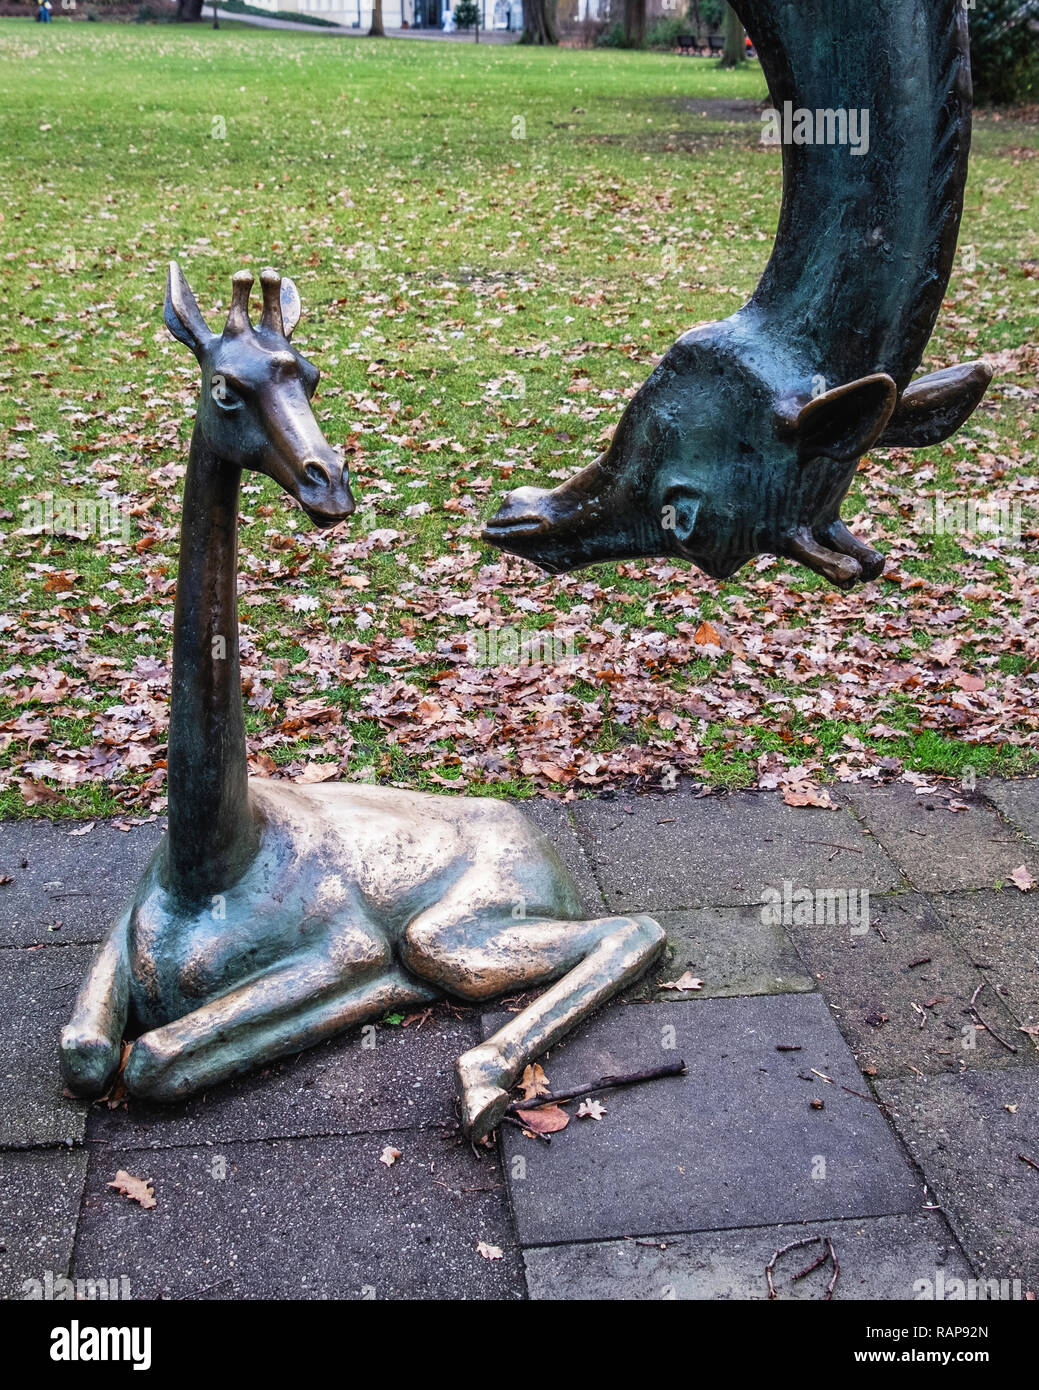 Berlin-Köpenick Sculpture of two giraffes by sculptor Hans-Detlev Hennig  in Schloss Palace park on an island in the Dahme river. Stock Photo